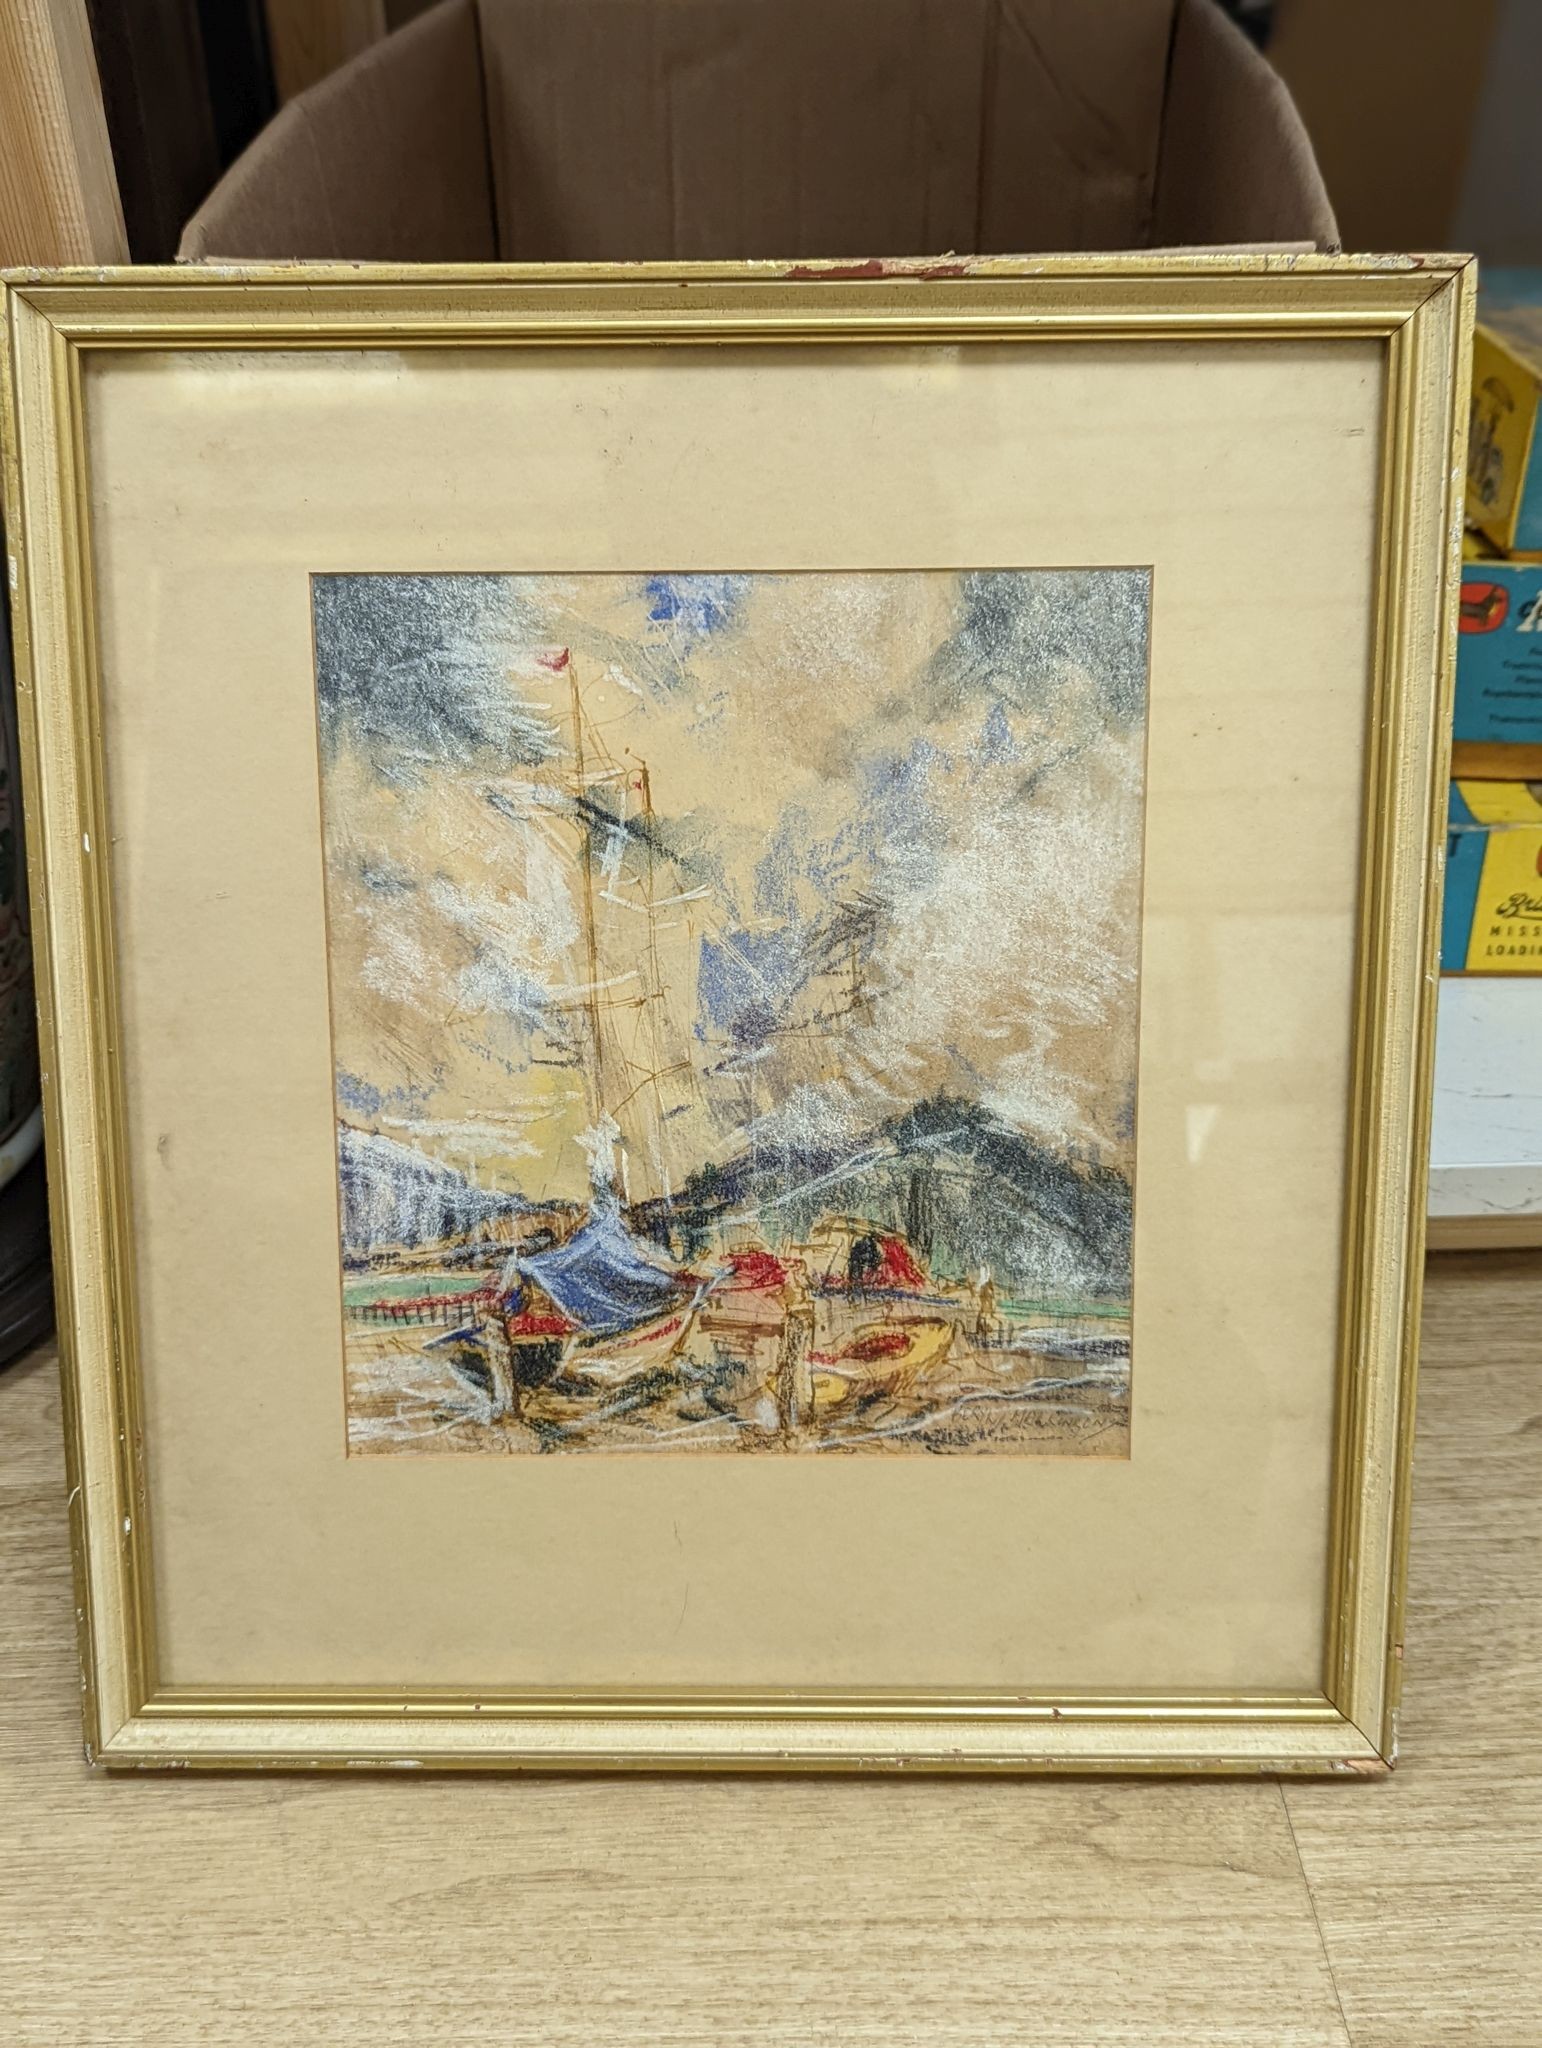 Beryl Mallinson (1916-1991), pen and pastel, Boats at Newport, signed, 25 x 22cm